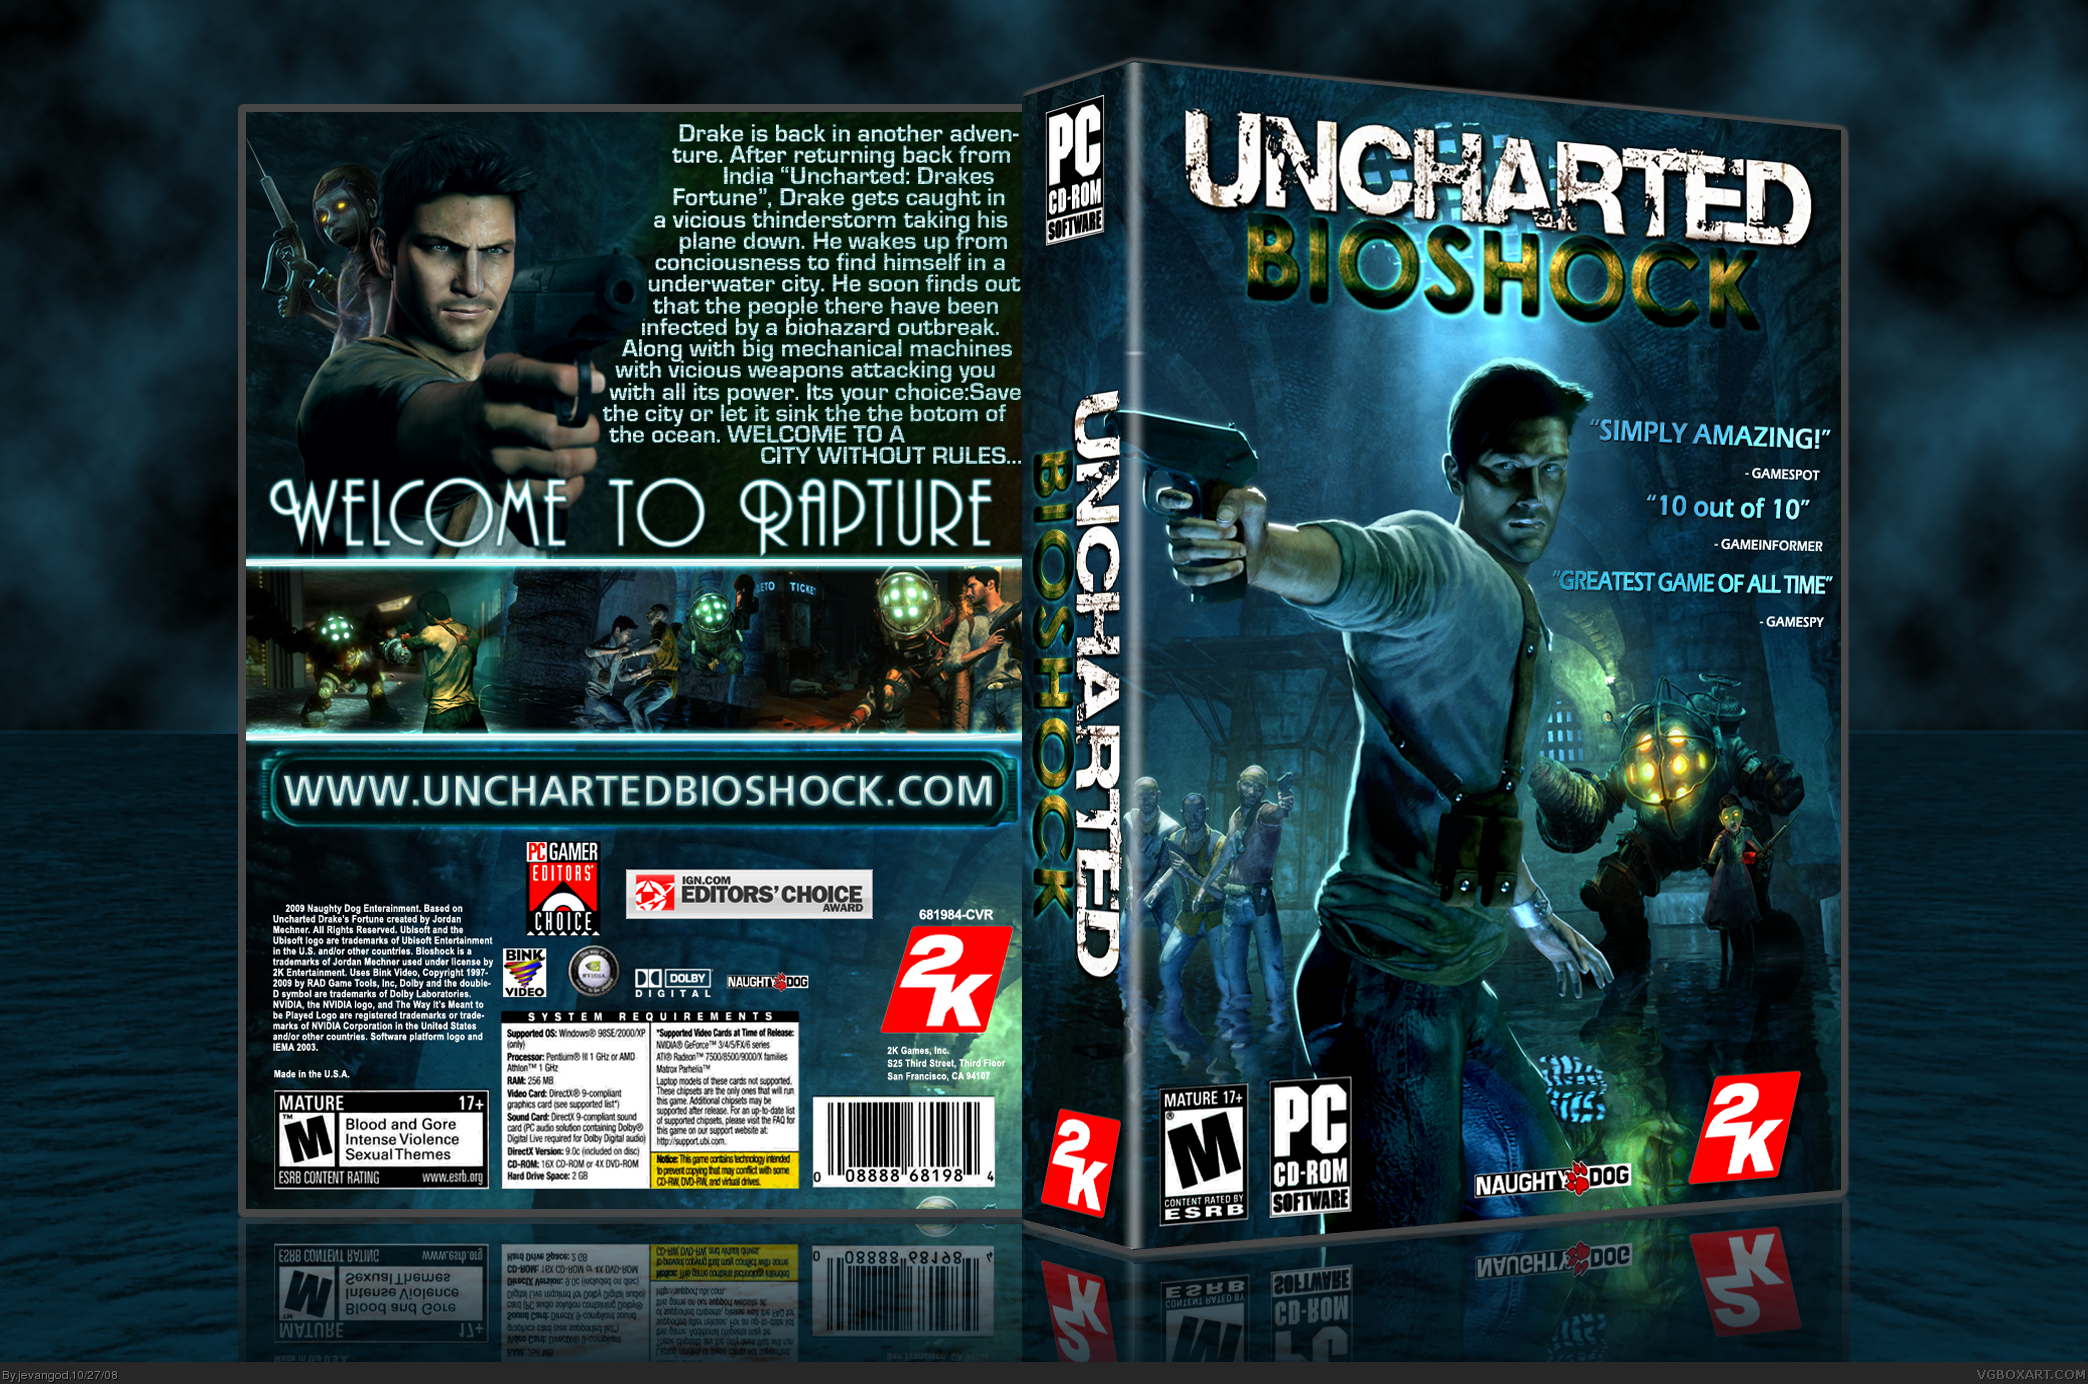 Uncharted: Bioshock box cover